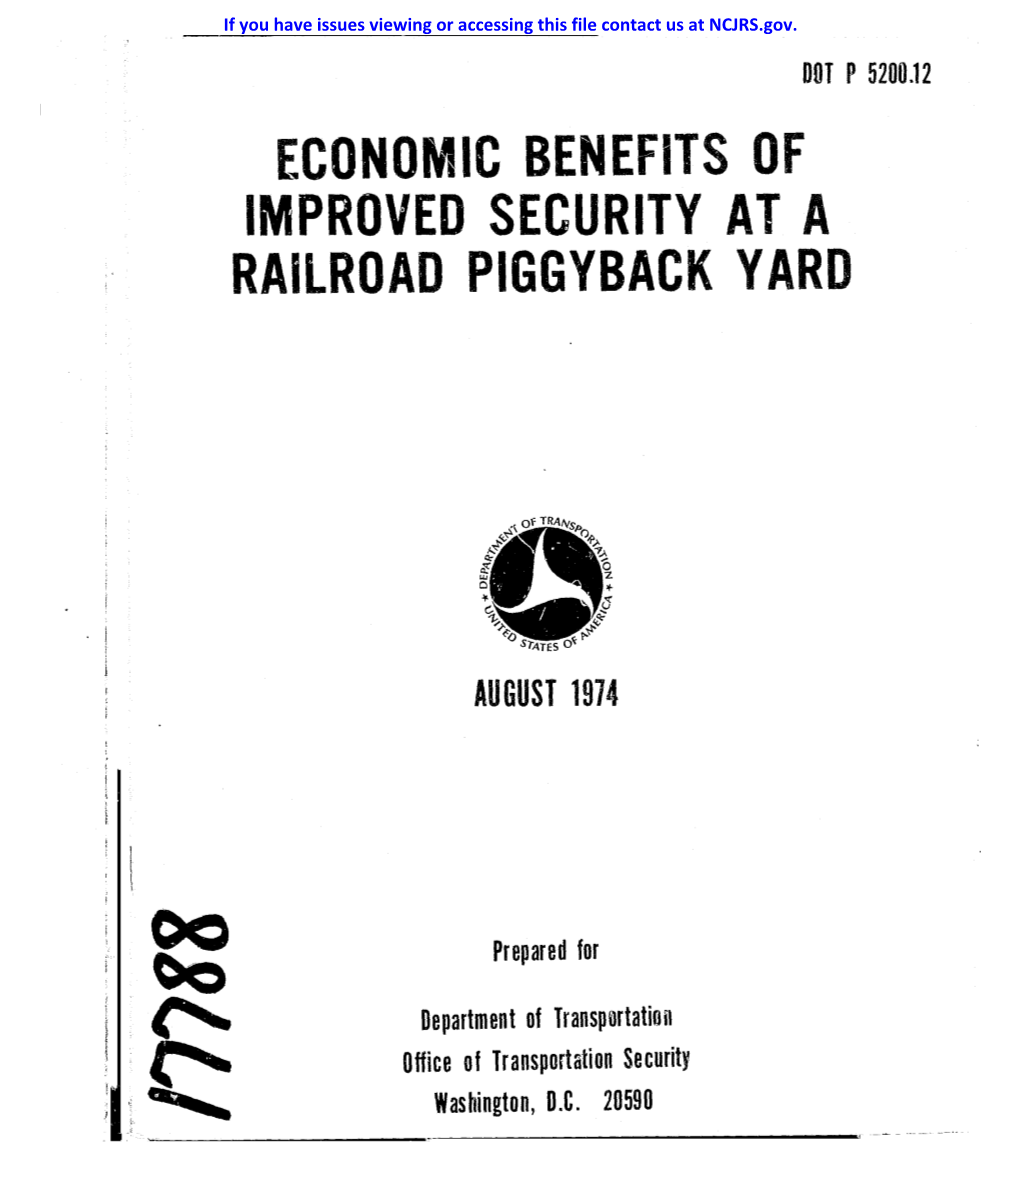 Economic Benefits of Improved Security at a Railroad Piggyback Yard